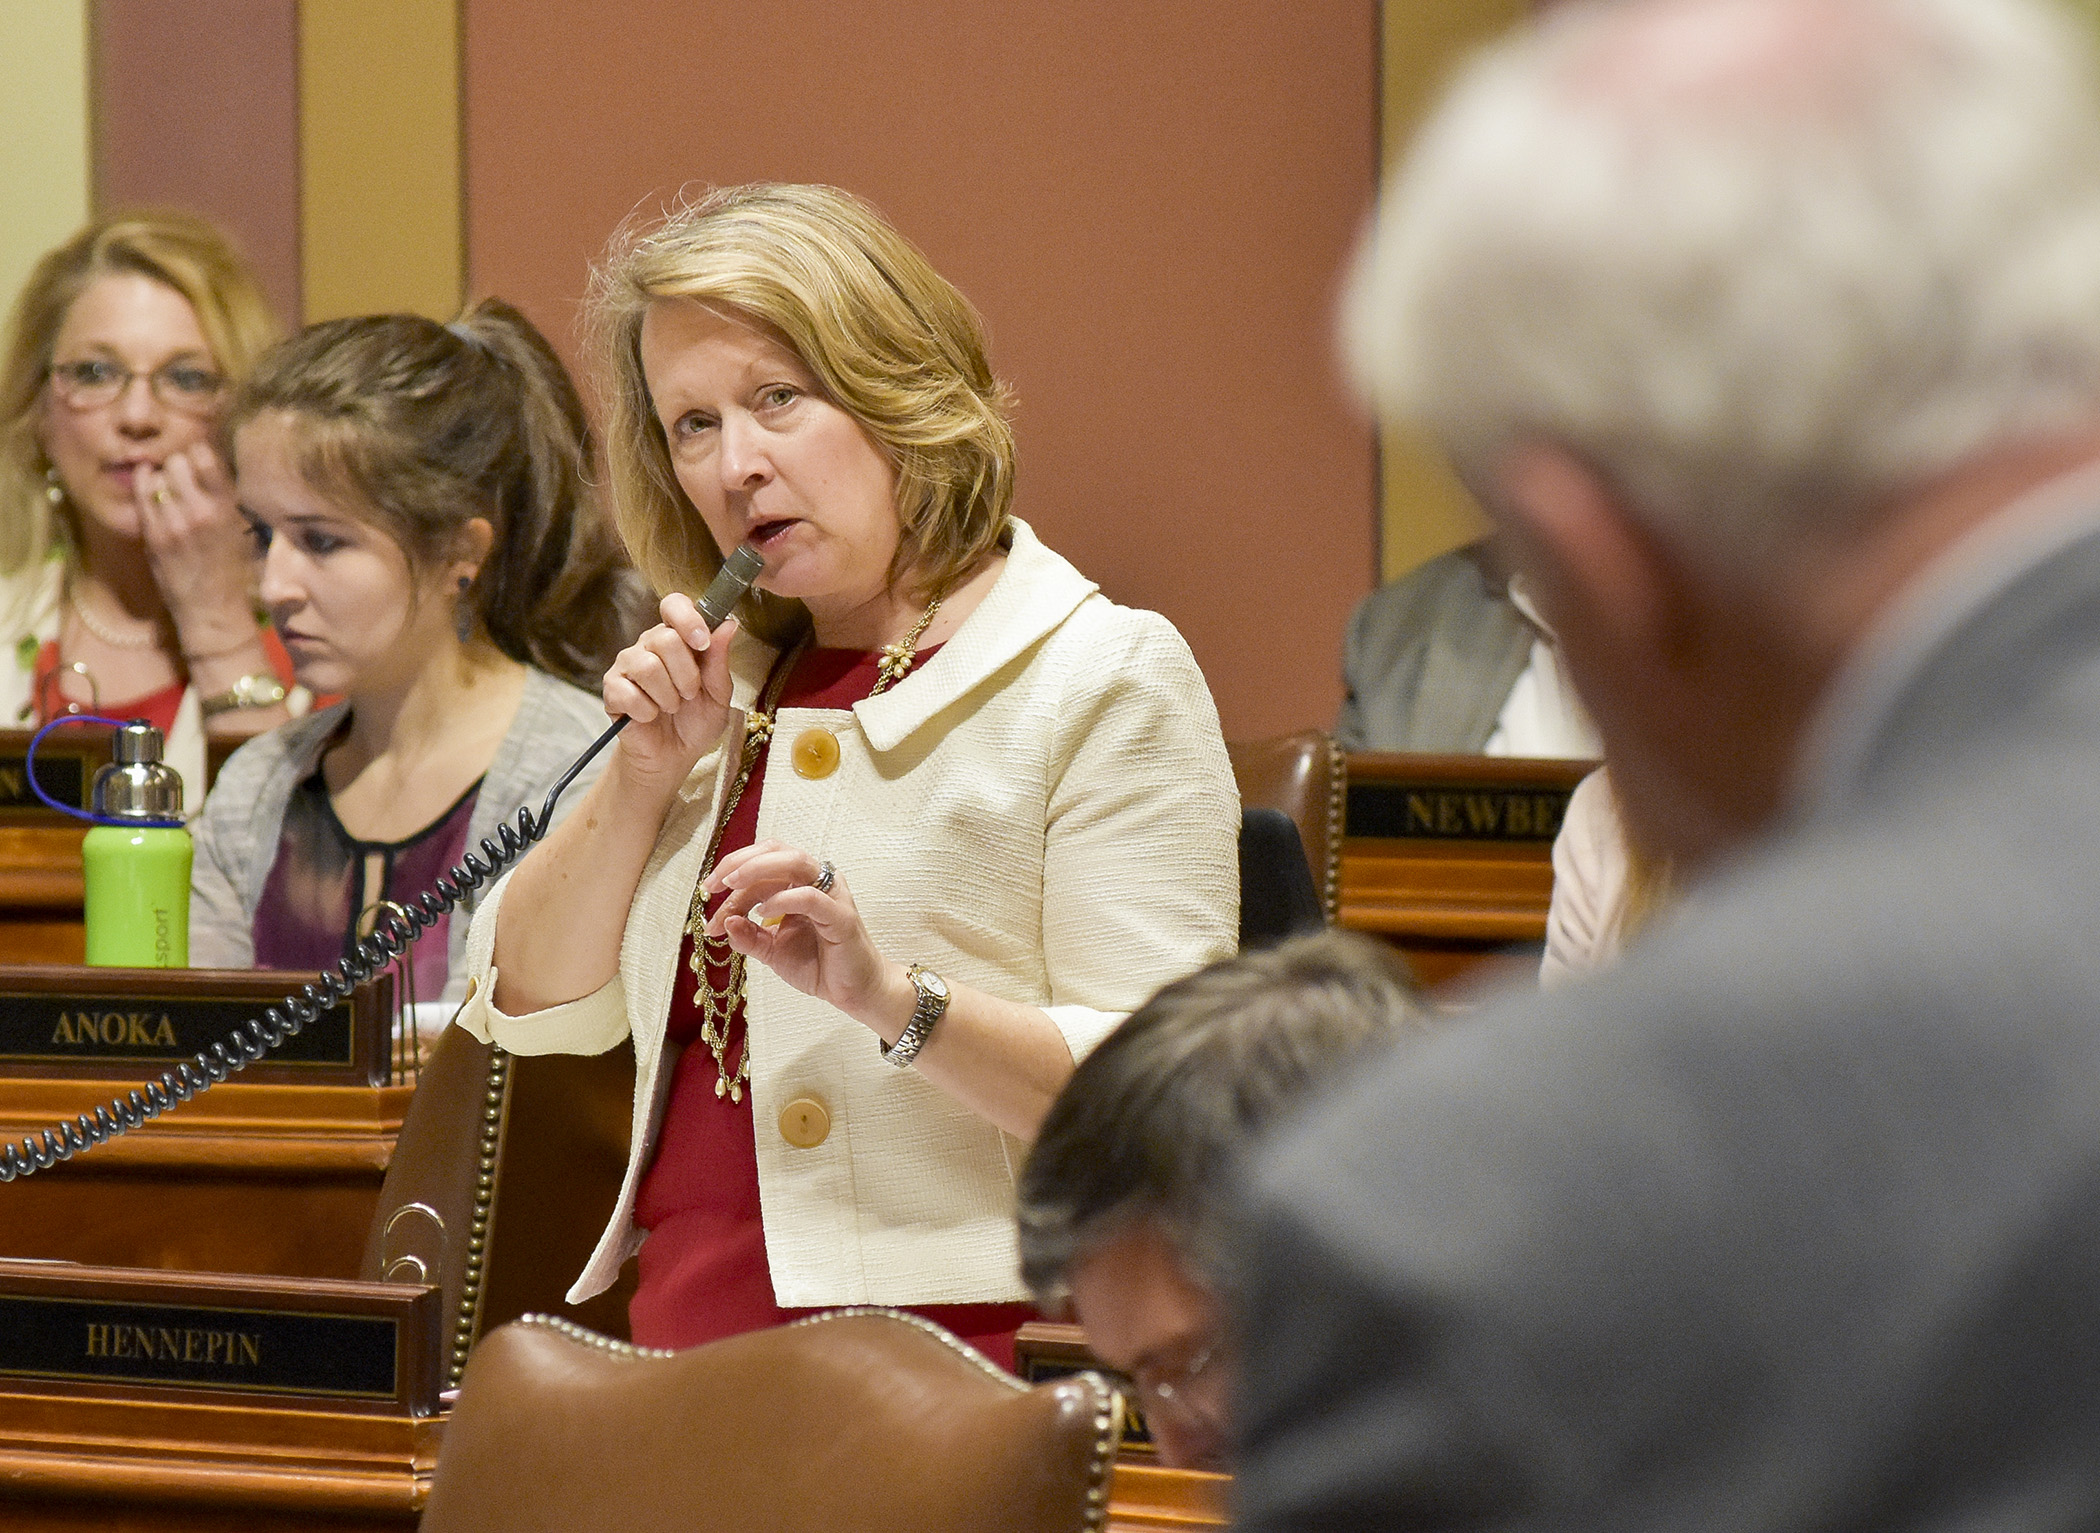 Jenifer Loon, chair of the House Education Finance Committee, responds to a question from Rep. Lyndon Carlson, Sr., foreground, during April 25 floor debate of the omnibus education bill. Photo by Andrew VonBank